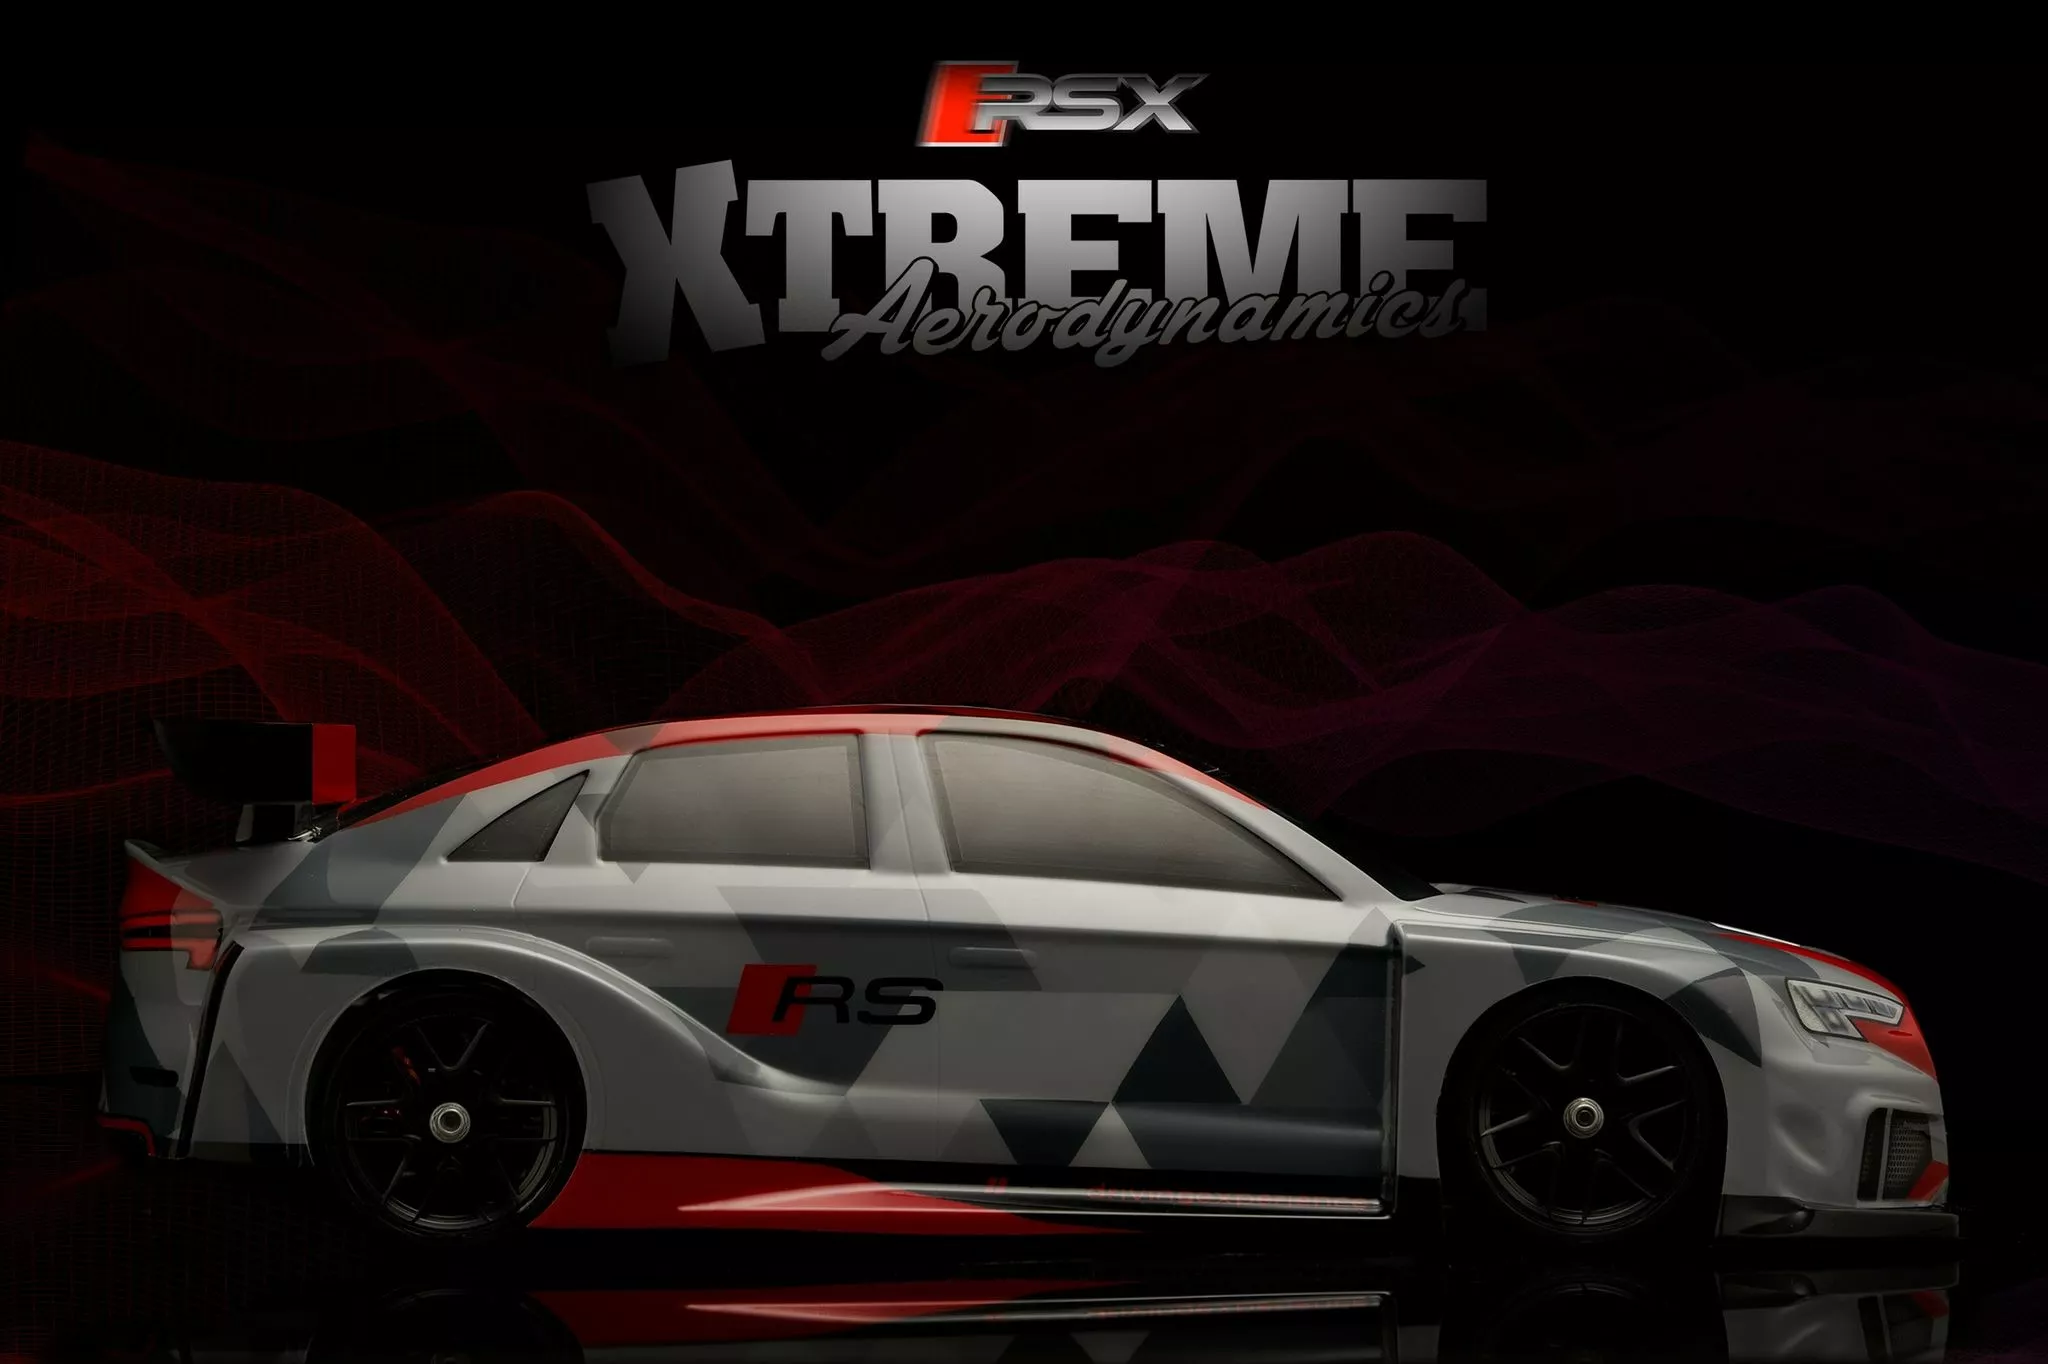 Xtreme RSX 1:10 Clear Body 0.7mm (190mm)